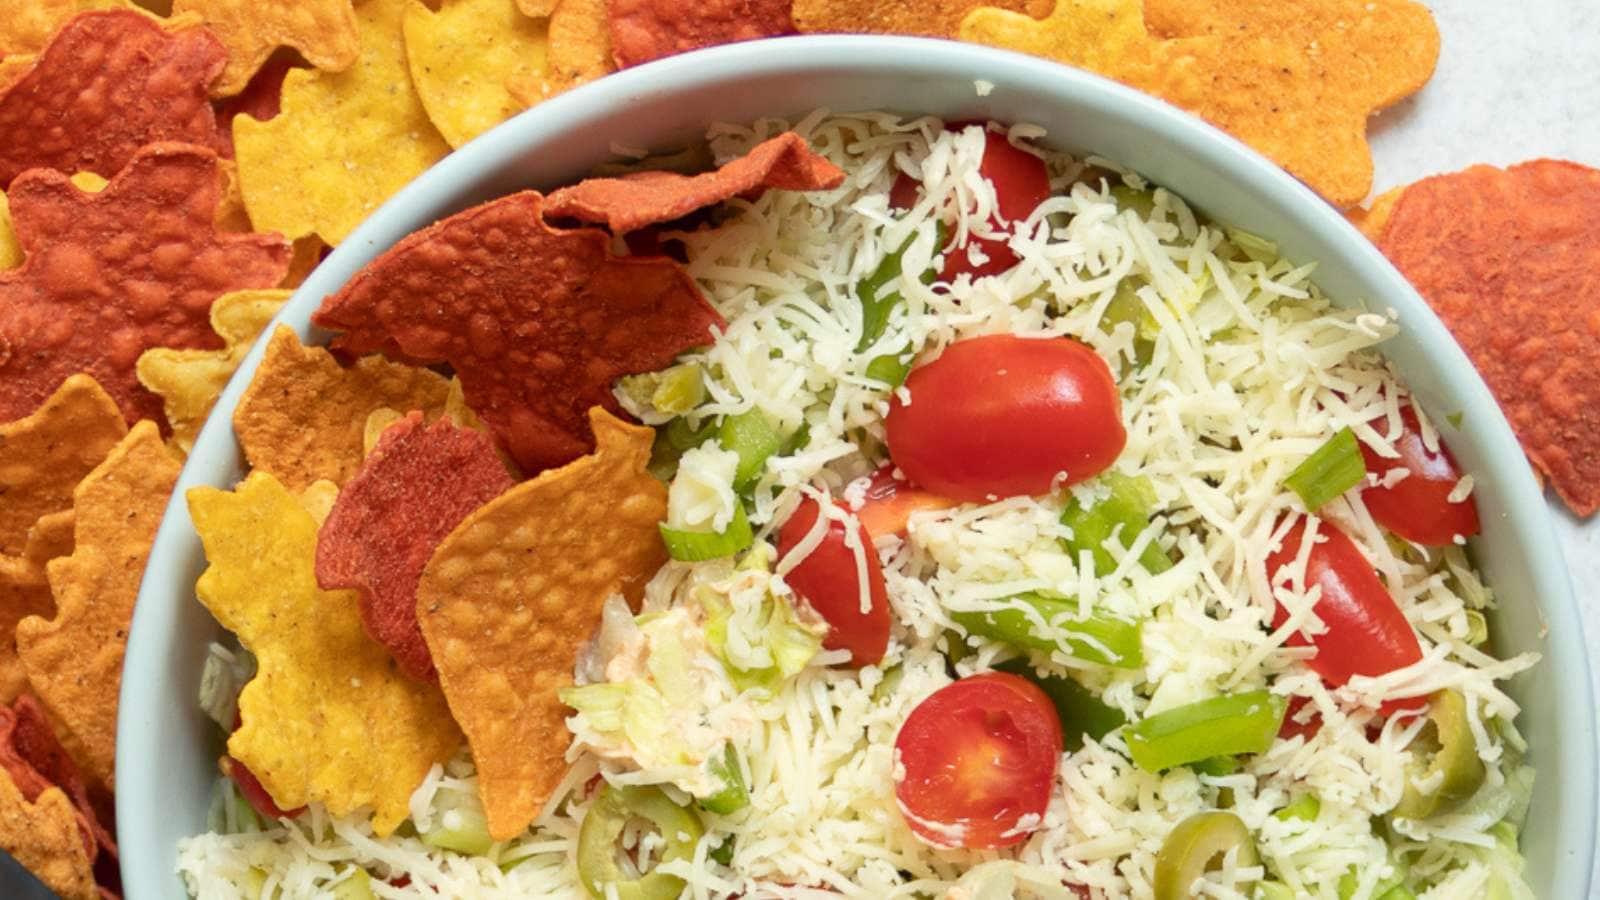 Taco Dip recipe by Cheerful Cook.